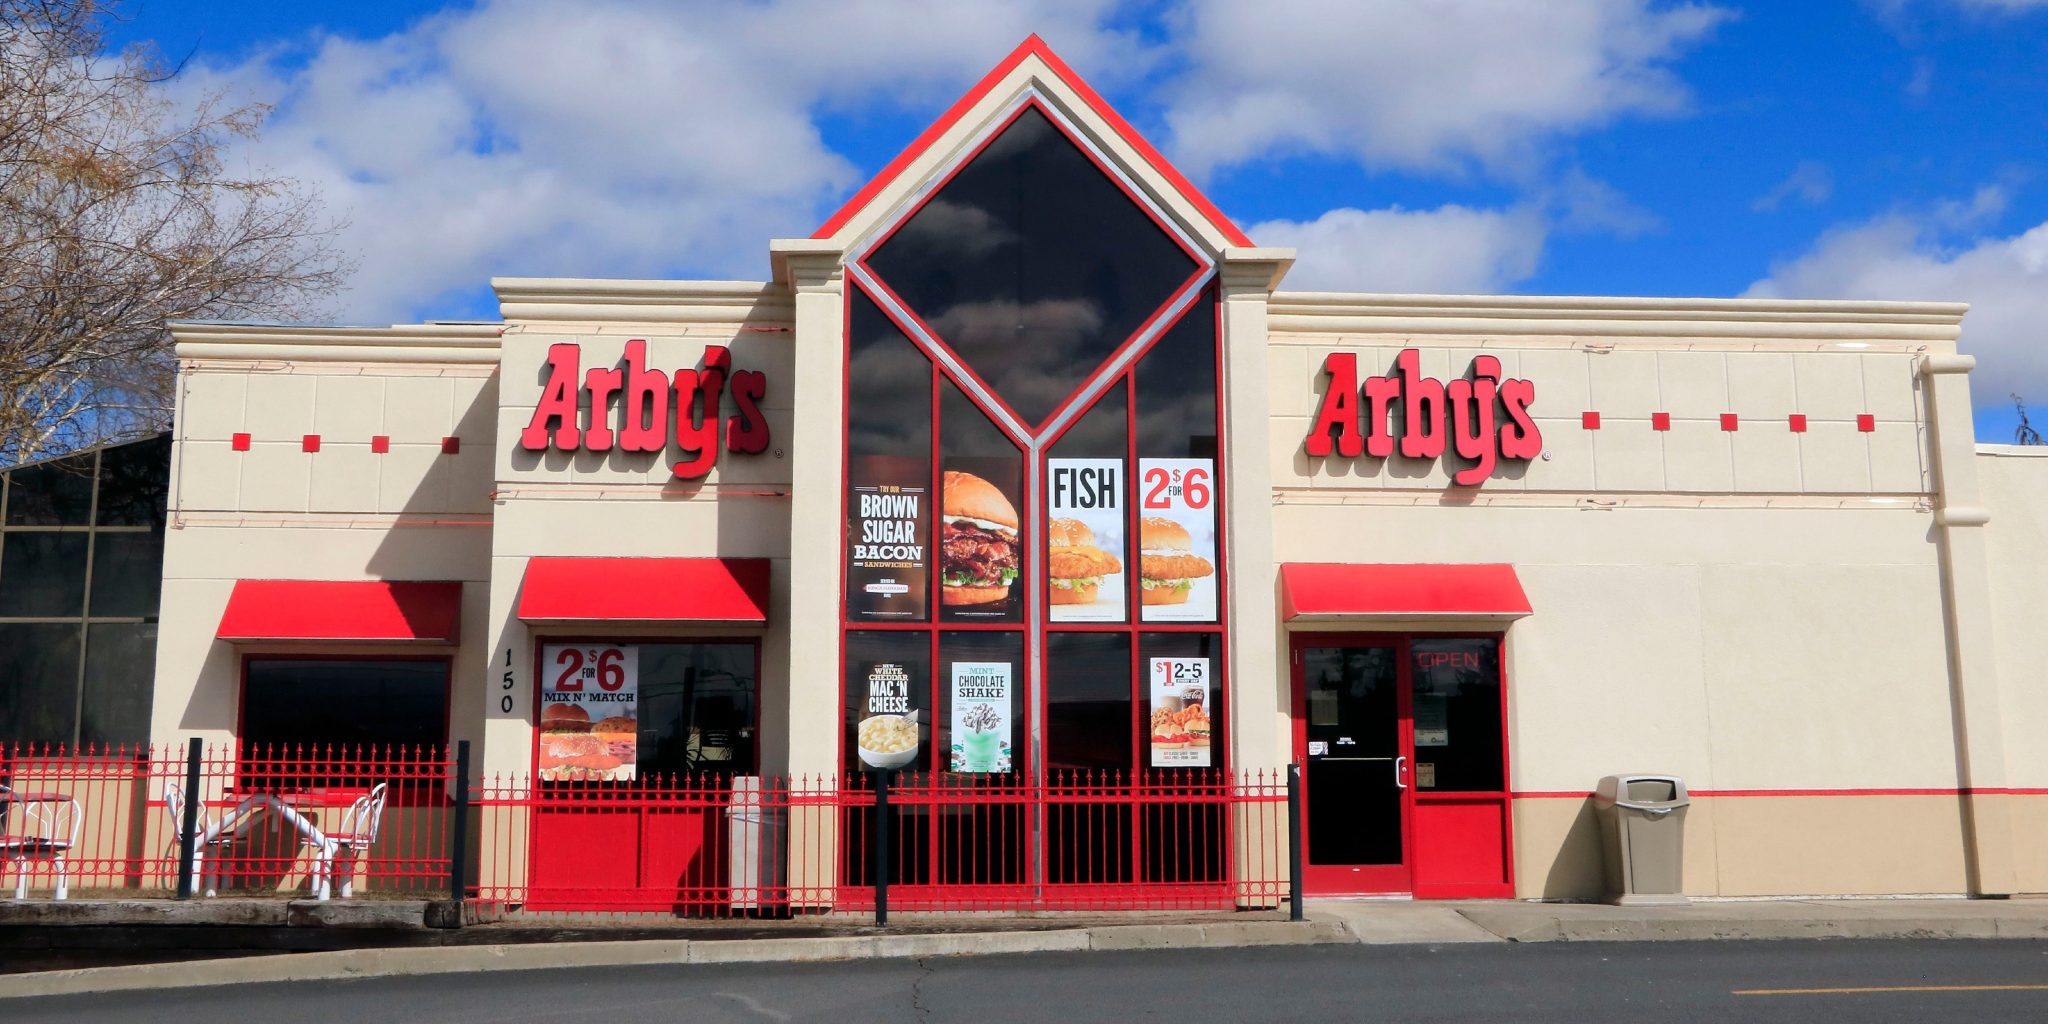 An Arby's employee was fired after writing a homophobic slur on a